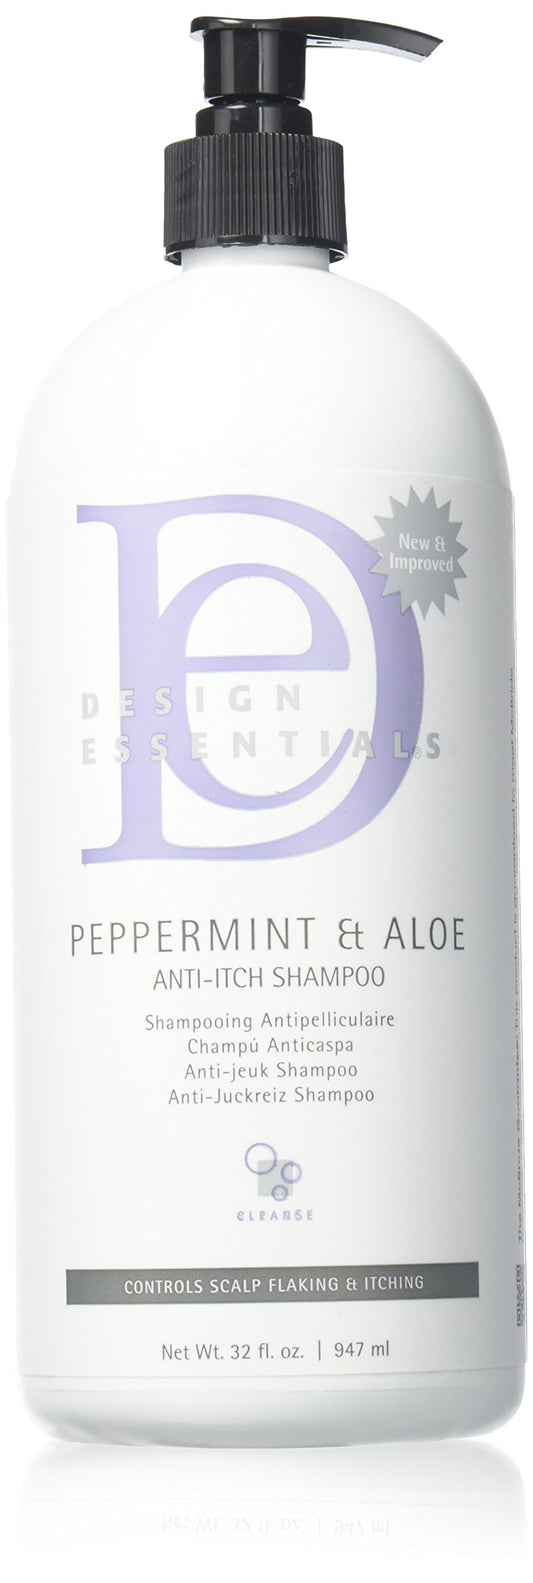 Design Essentials Pppermint & Aloe Therapeutics AntiItch Shampoo Control Sclap Flaking & Itching, 32 Fl Oz